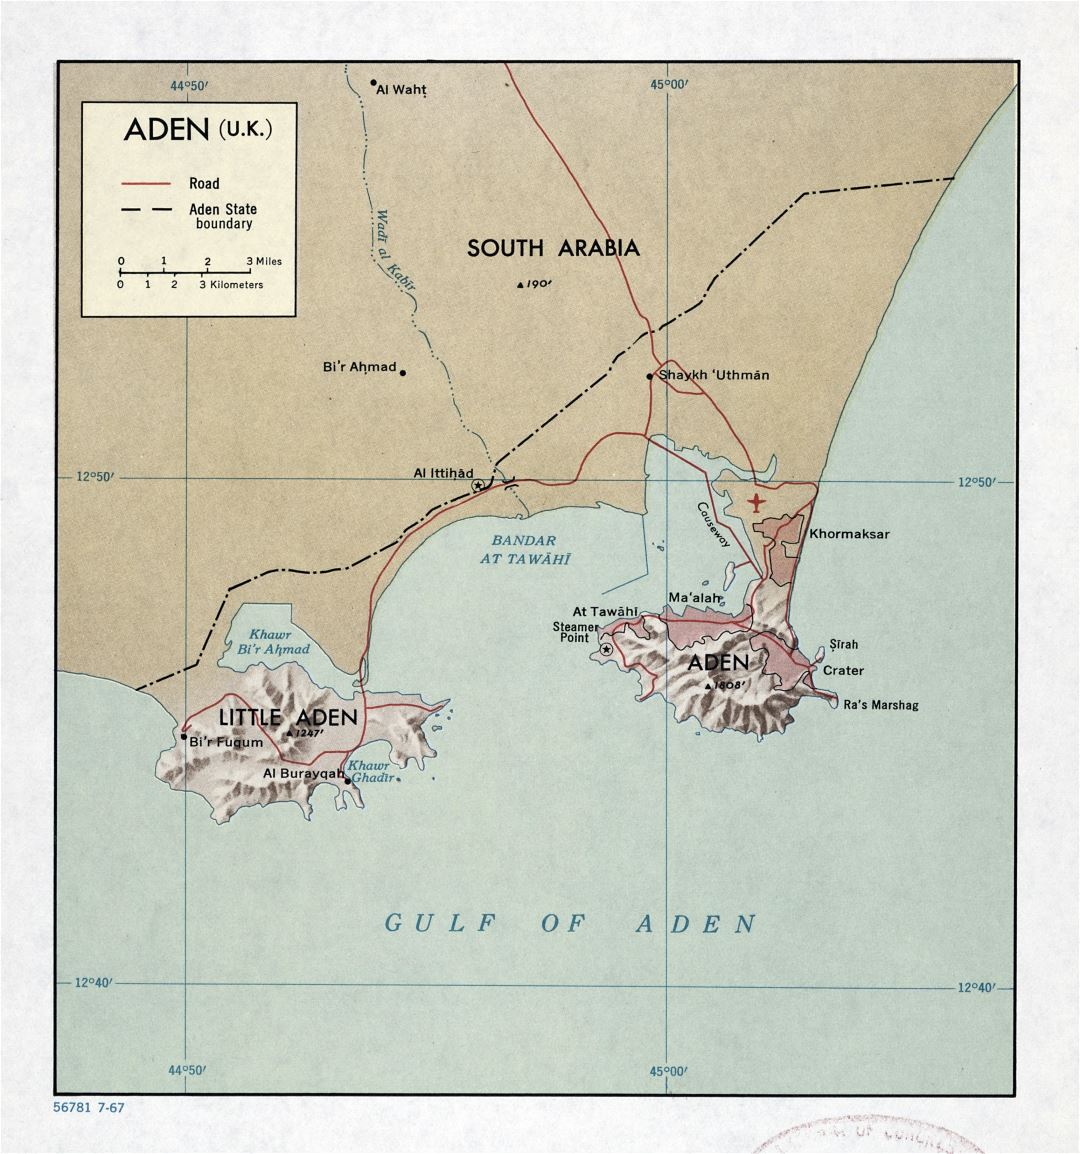 Large detailed map of Aden (U.K.) with relief and roads - 1967